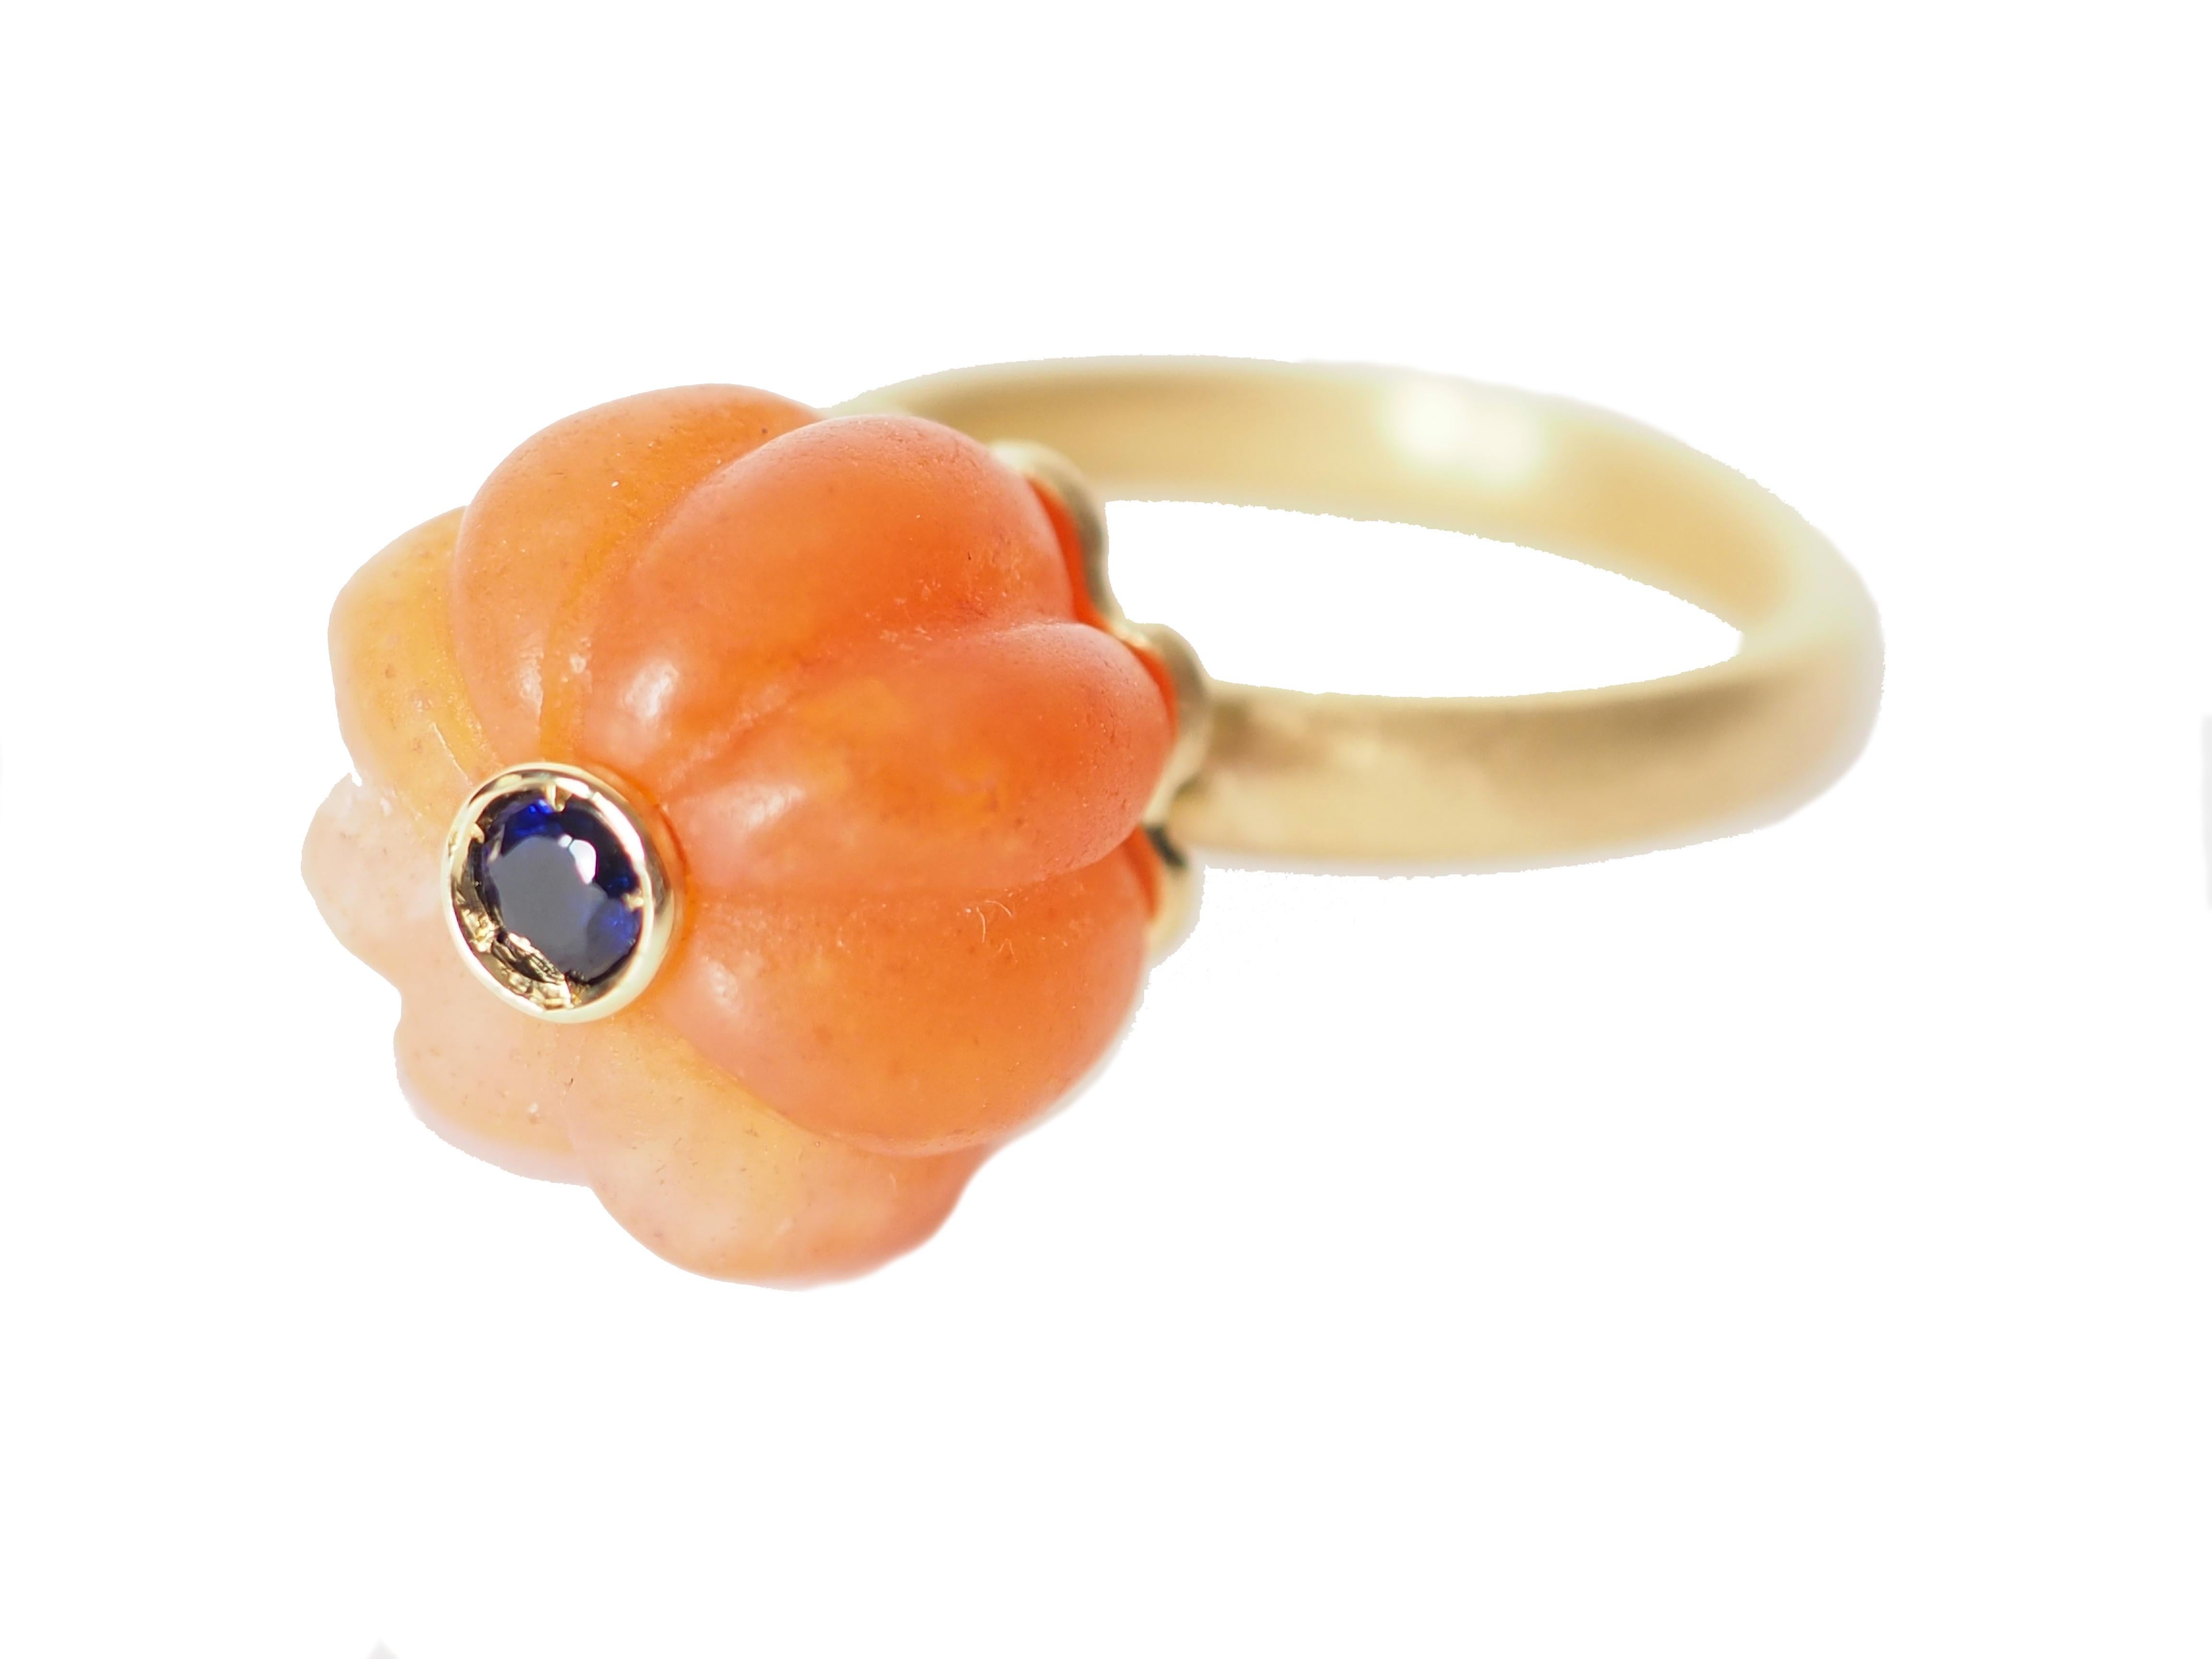 Carved  carnelian pumpkin shape with blu sapphire in the center 18 k brushed gold  gr 5,90. Size 14 eu.
All Giulia Colussi jewelry is new and has never been previously owned or worn. Each item will arrive at your door beautifully gift wrapped in our